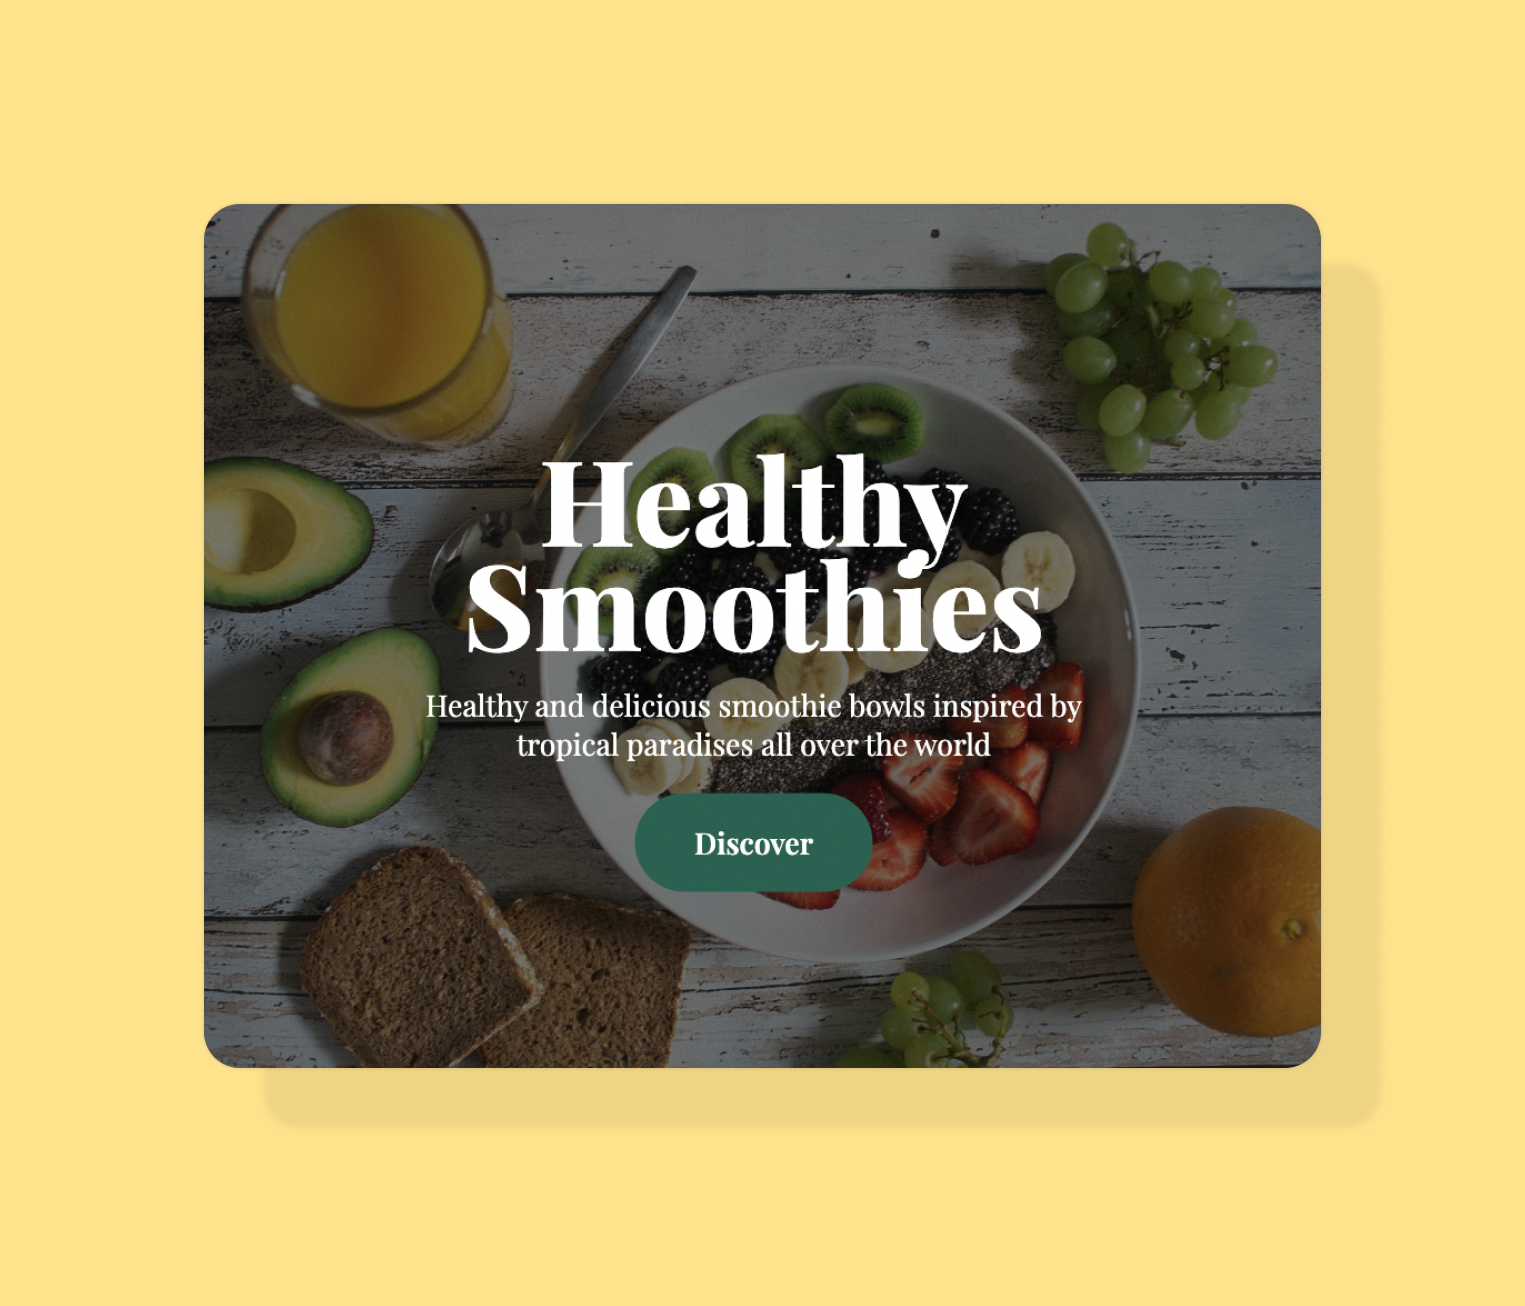 Smoothies App using full HTML and CSS